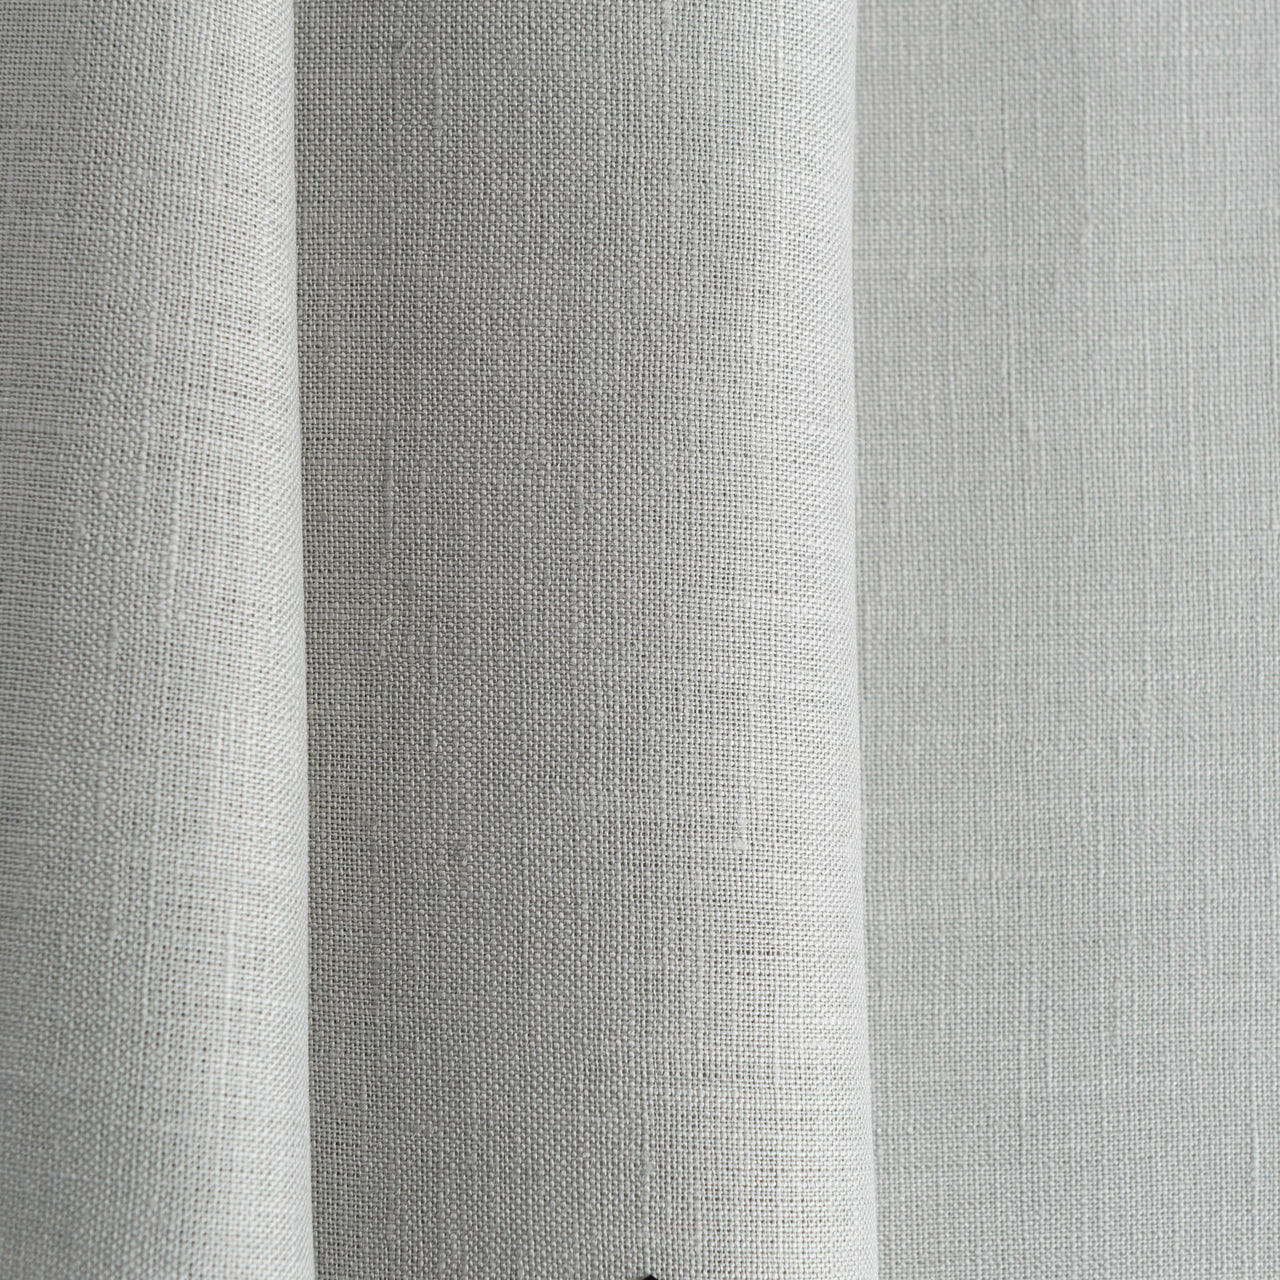 Double Pinch Pleat Grey Linen Curtain Panel with Blackout Lining - Custom Sizes & Colours, Color: Stone Grey